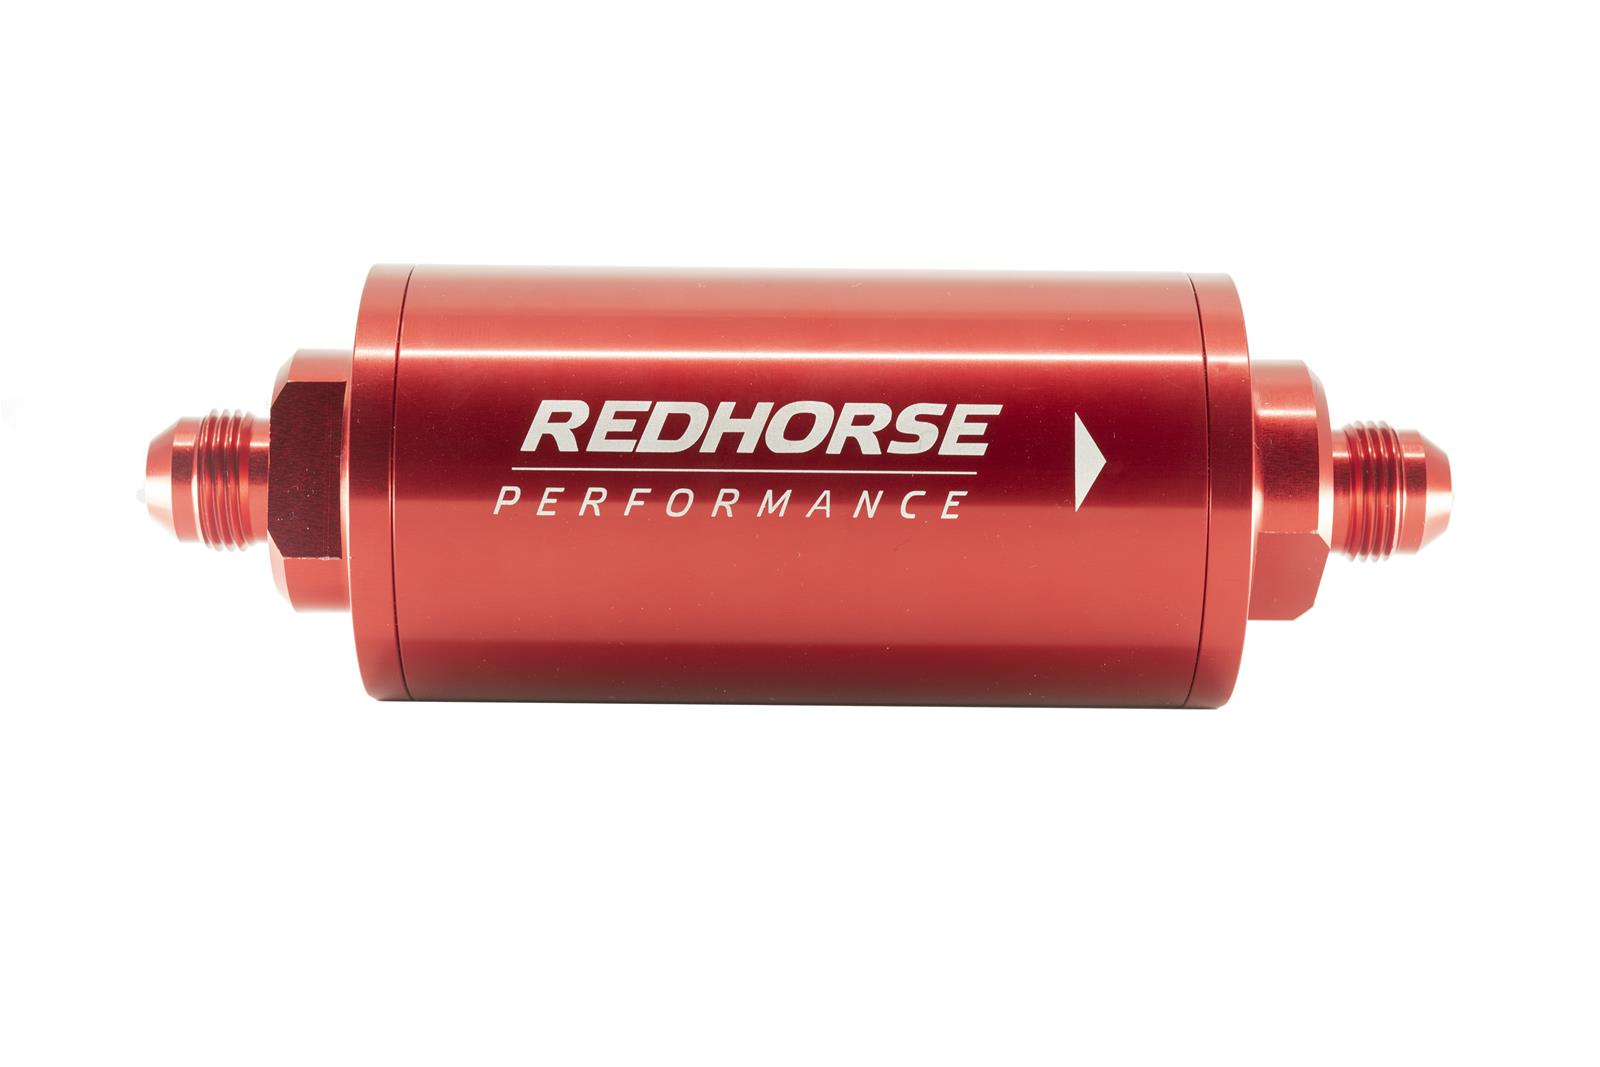 Redhorse Performance 4651-12-3-12 6in Cylindrical In-Line Race Fuel Filter w/ 12 Micron Fiberglass element - 12 AN